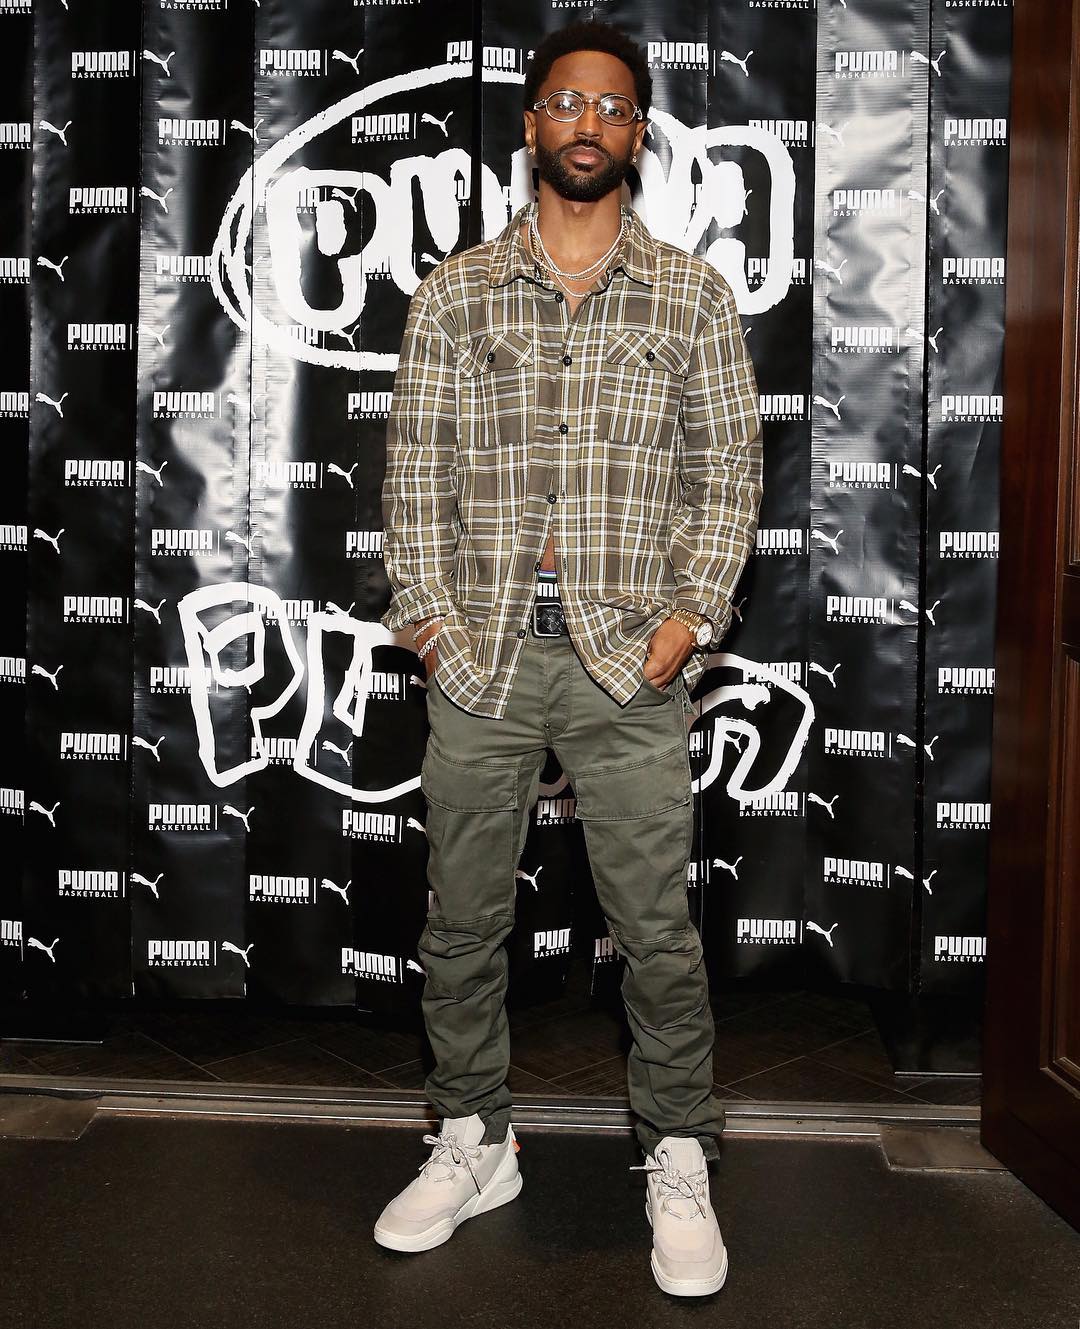 SPOTTED: Big Sean Rocks Modest Fit for Puma Basketball Launch Party